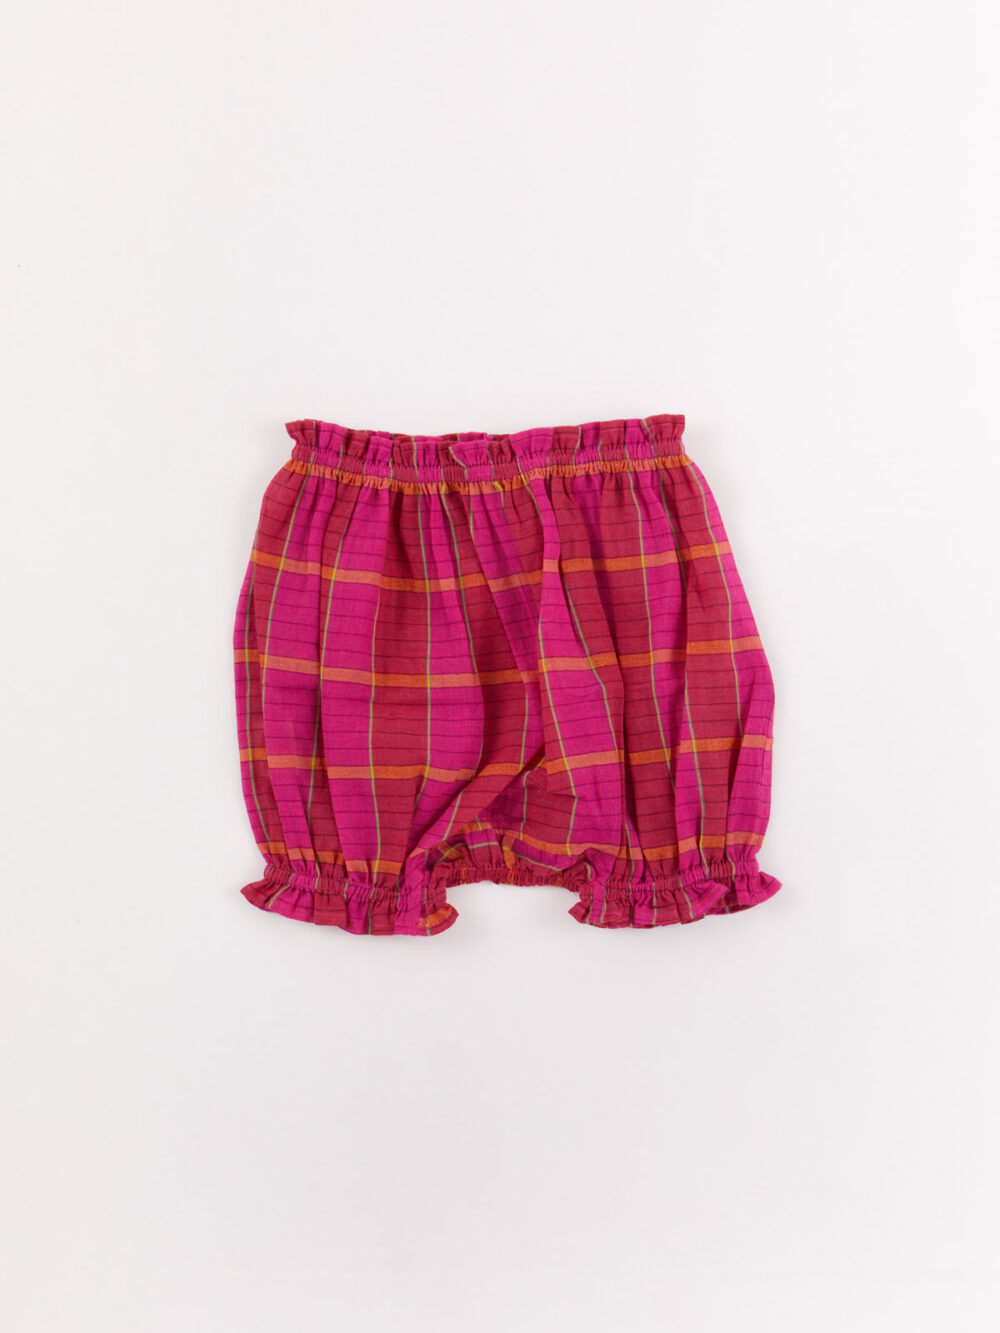 injiri bloomers in pink and red plaid